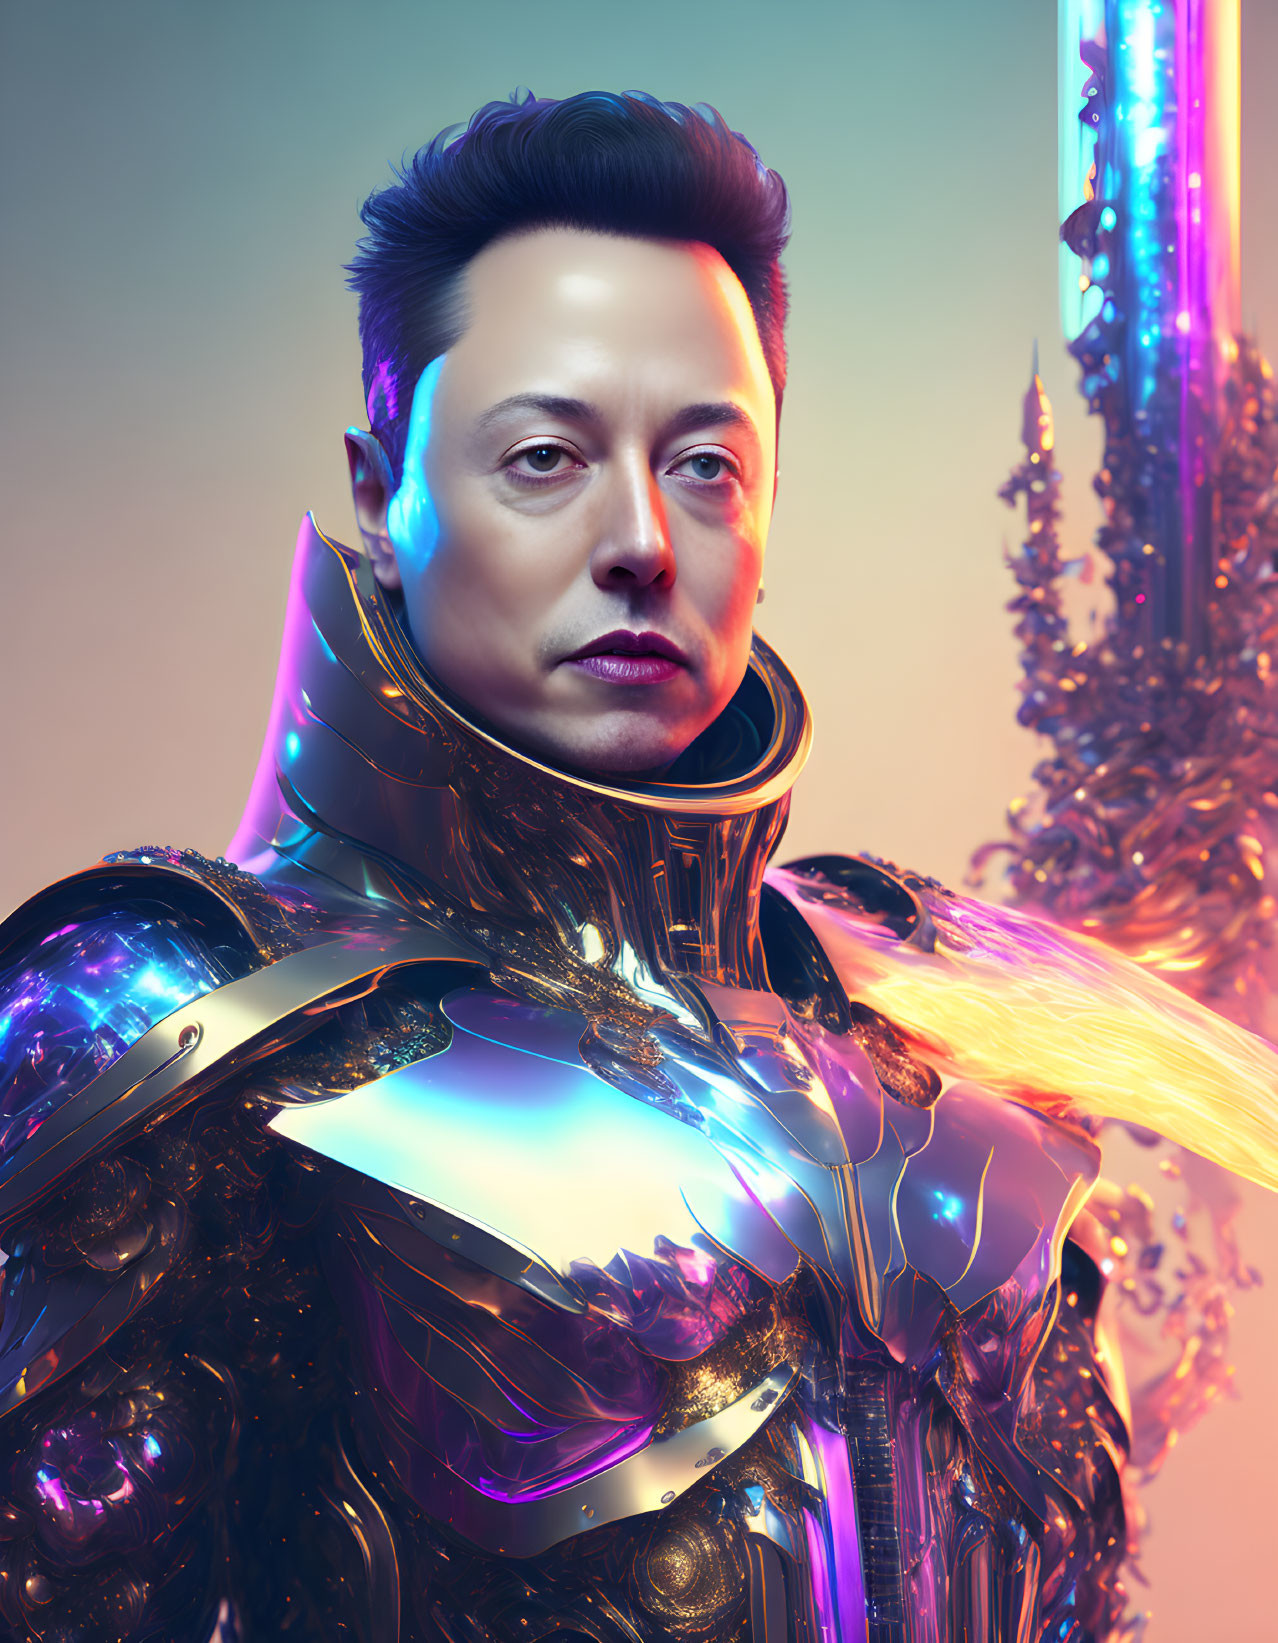 Digitally altered image of person in futuristic armor with neon accents